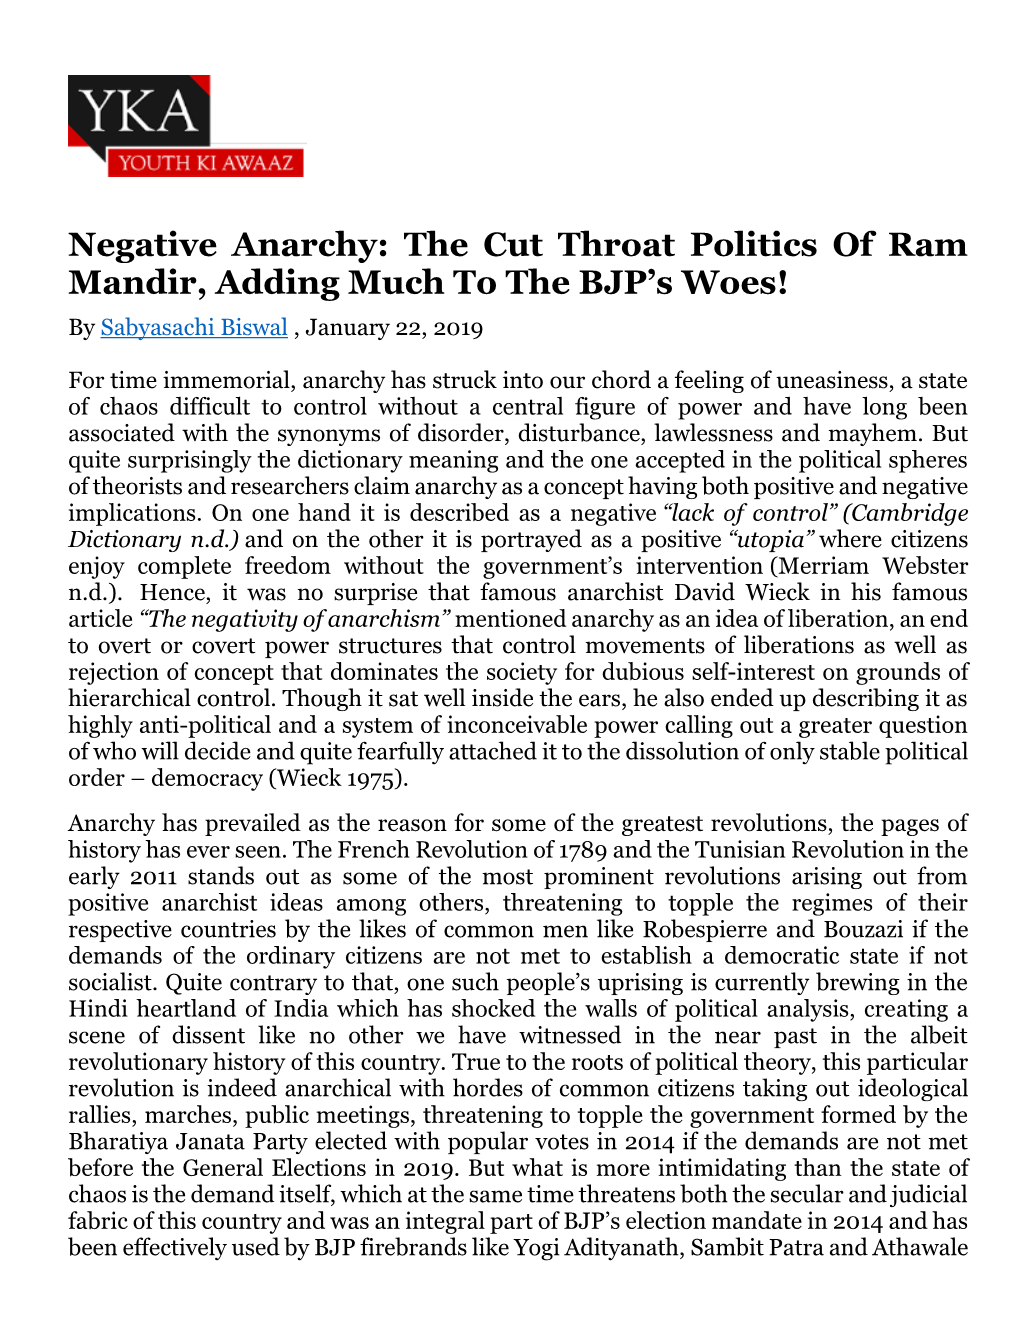 Negative Anarchy: the Cut Throat Politics of Ram Mandir, Adding Much to the BJP's Woes!